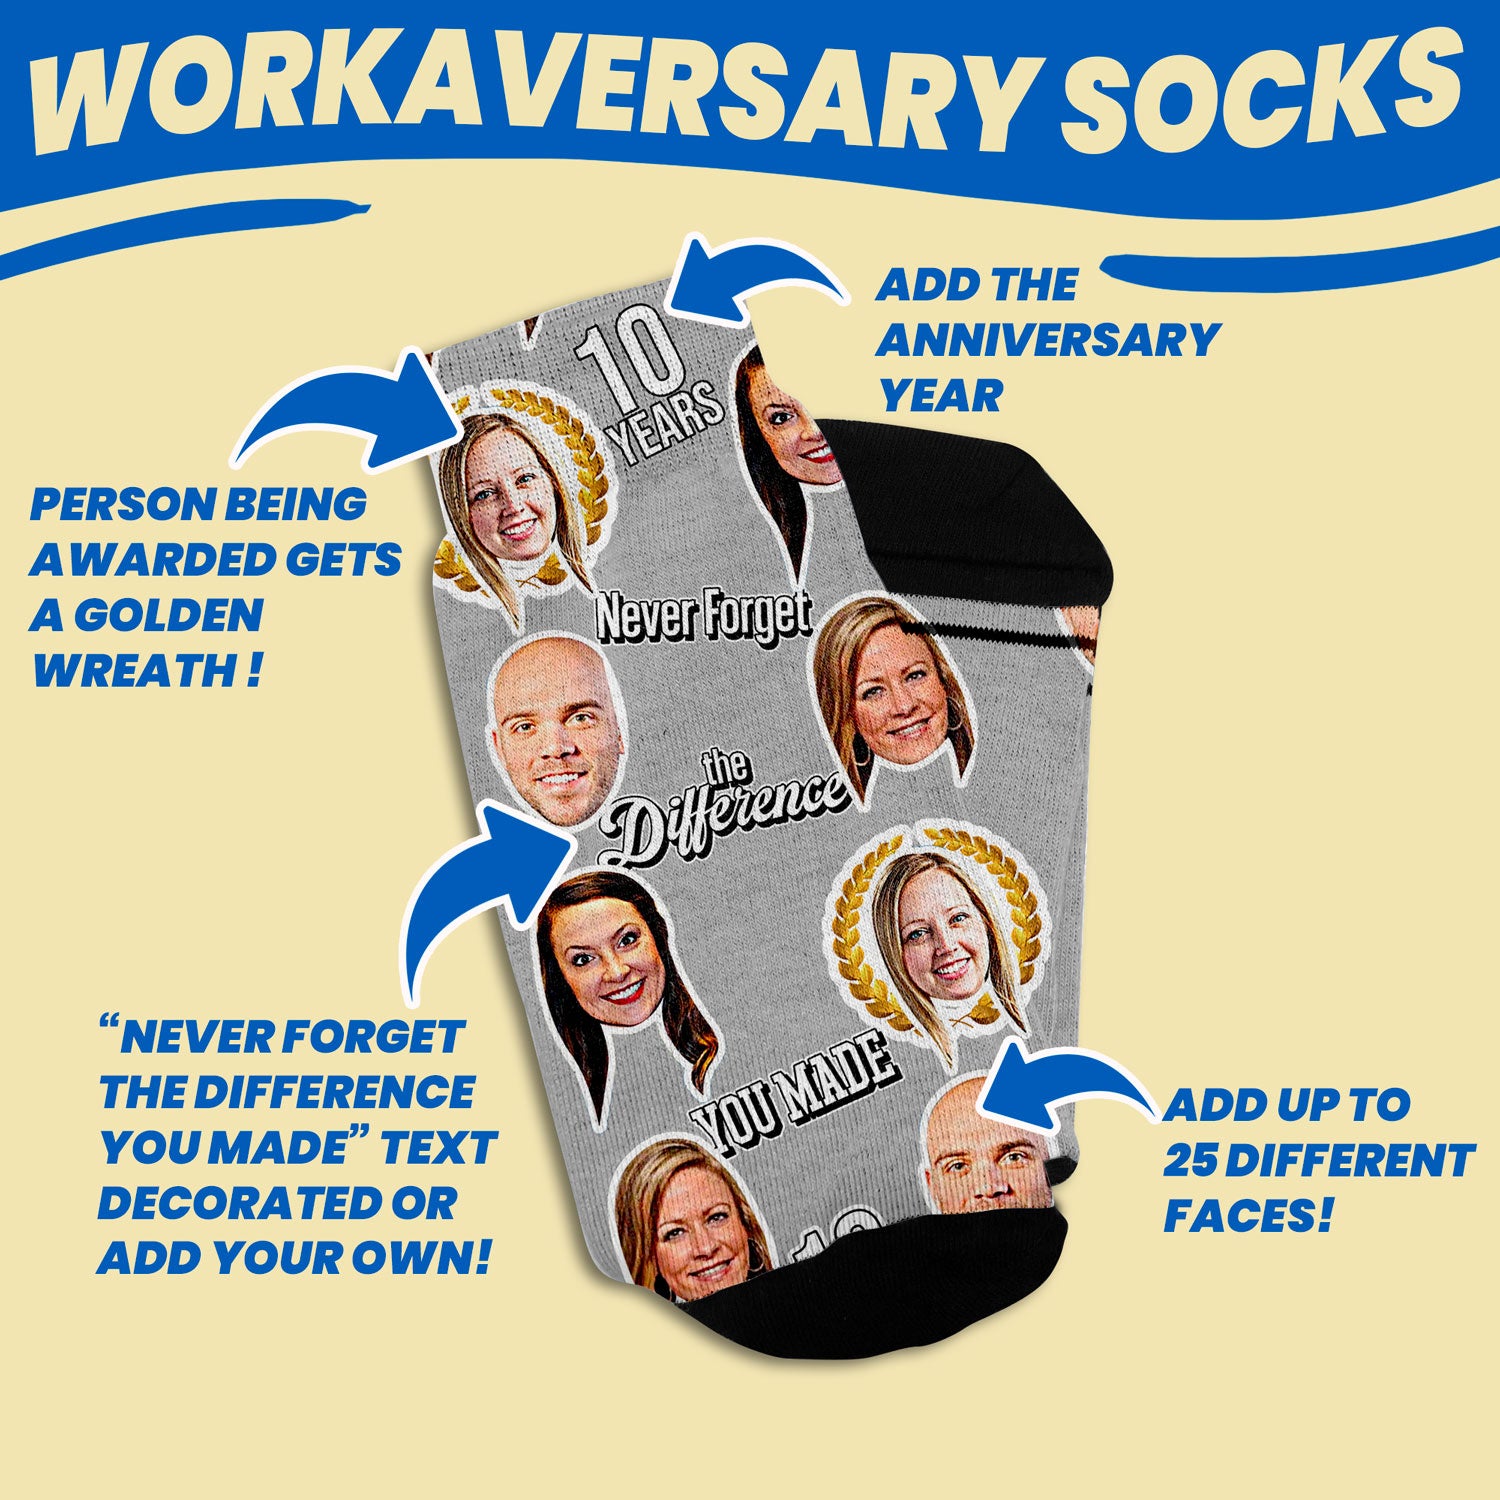 employee anniversary personalized socks with coworkers faces design features